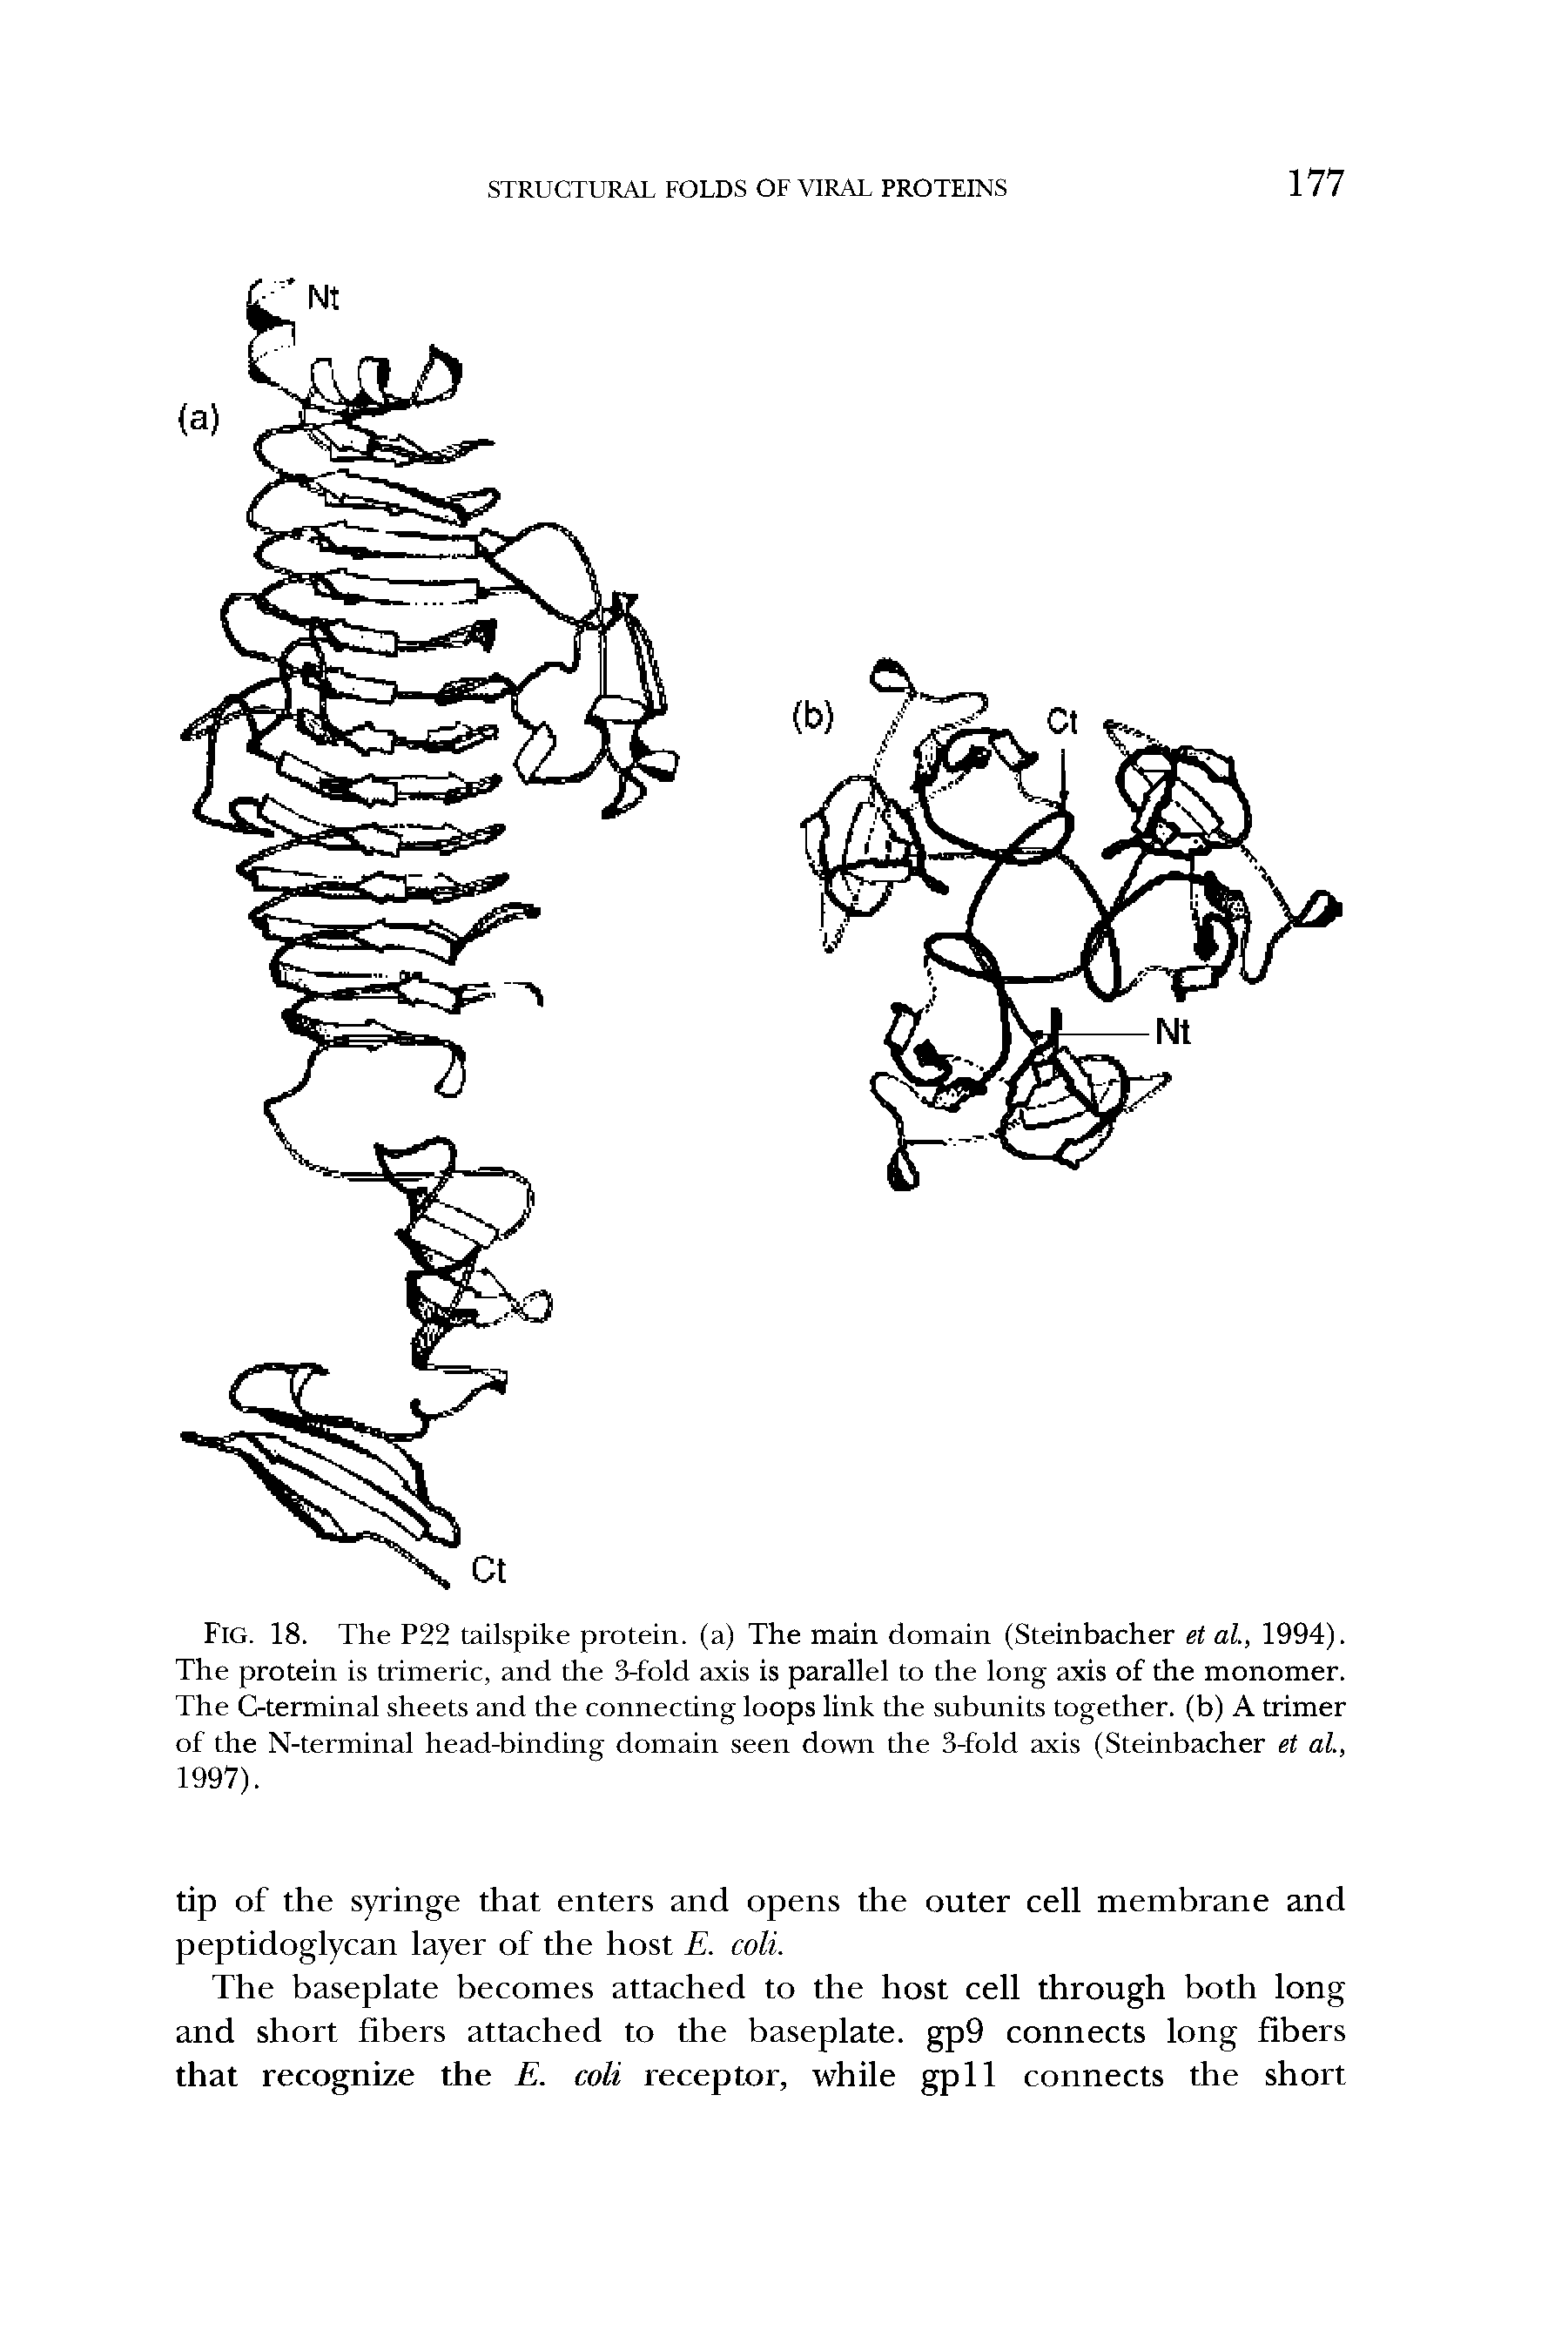 Fig. 18. The P22 tailspike protein, (a) The main domain (Steinbacher et al, 1994). The protein is trimeric, and the 3-fold axis is parallel to the long axis of the monomer. The G-terminal sheets and the connecting loops link the subunits together, (b) A trimer of the N-terminal head-binding domain seen down the 3-fold axis (Steinbacher et al., 1997).